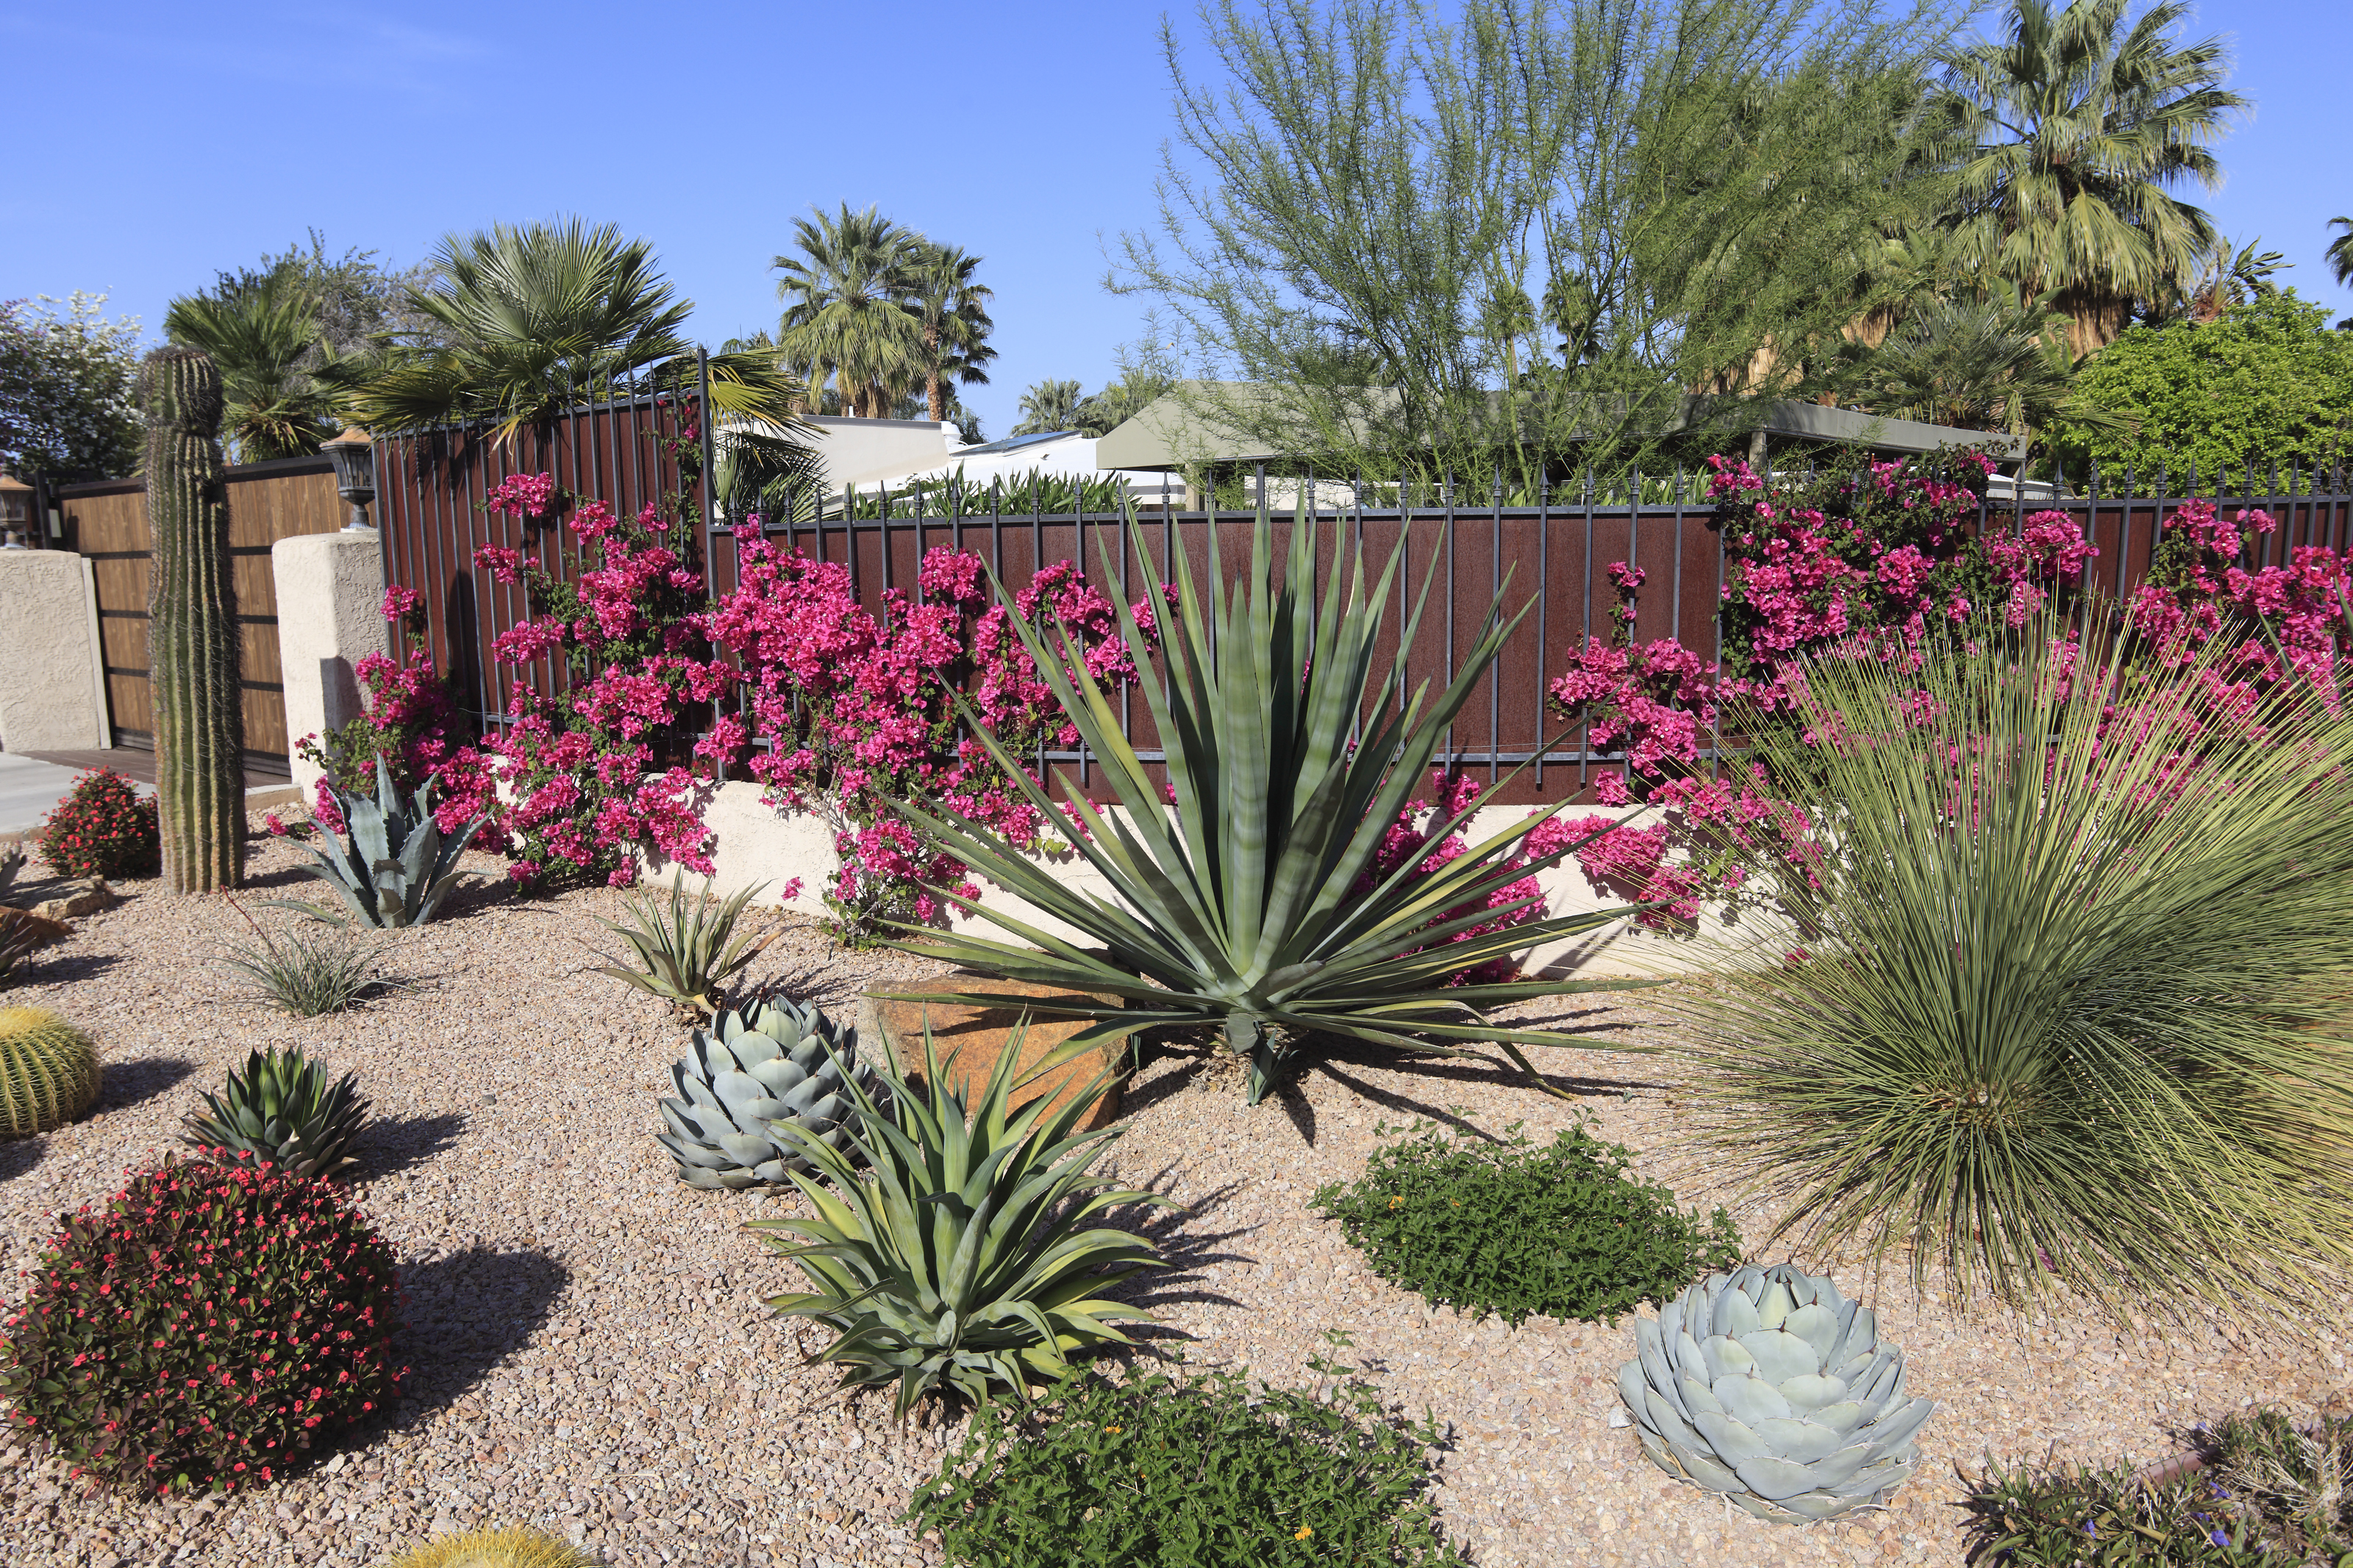 Landscaping for drought-tolerant lawns 